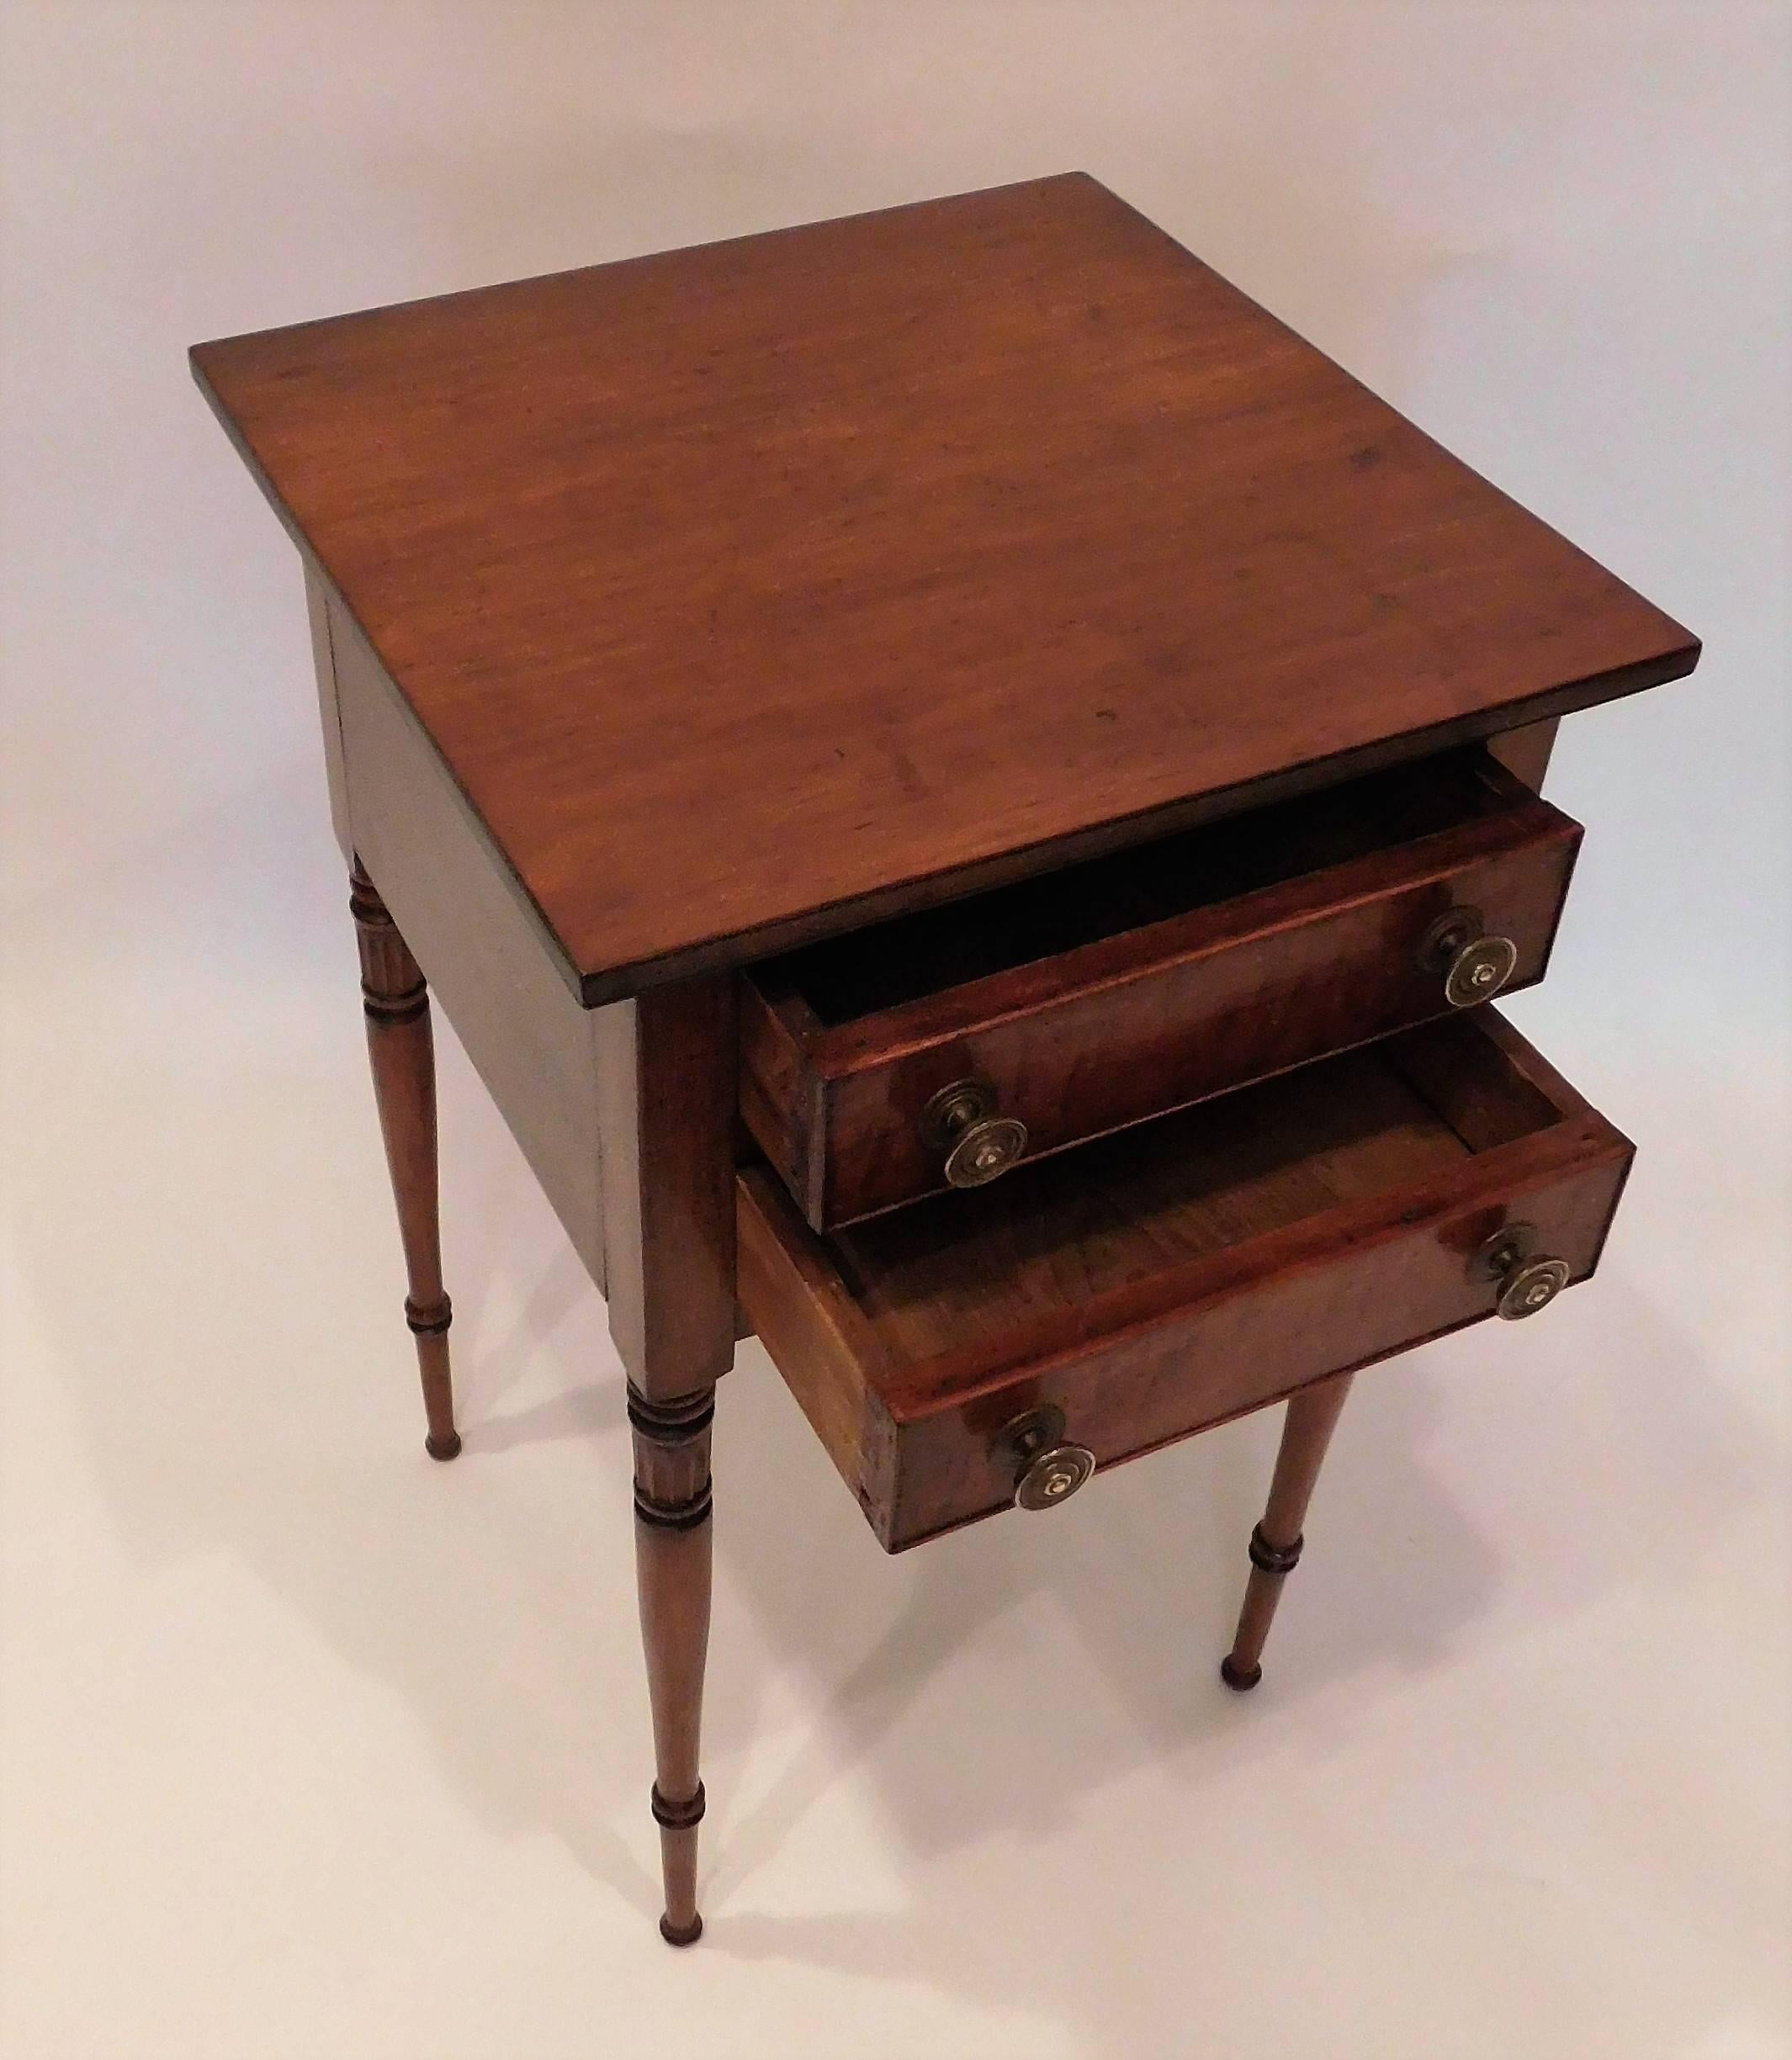 Charming two-drawer stand probably made in New York state or New England maple veneer on drawers.